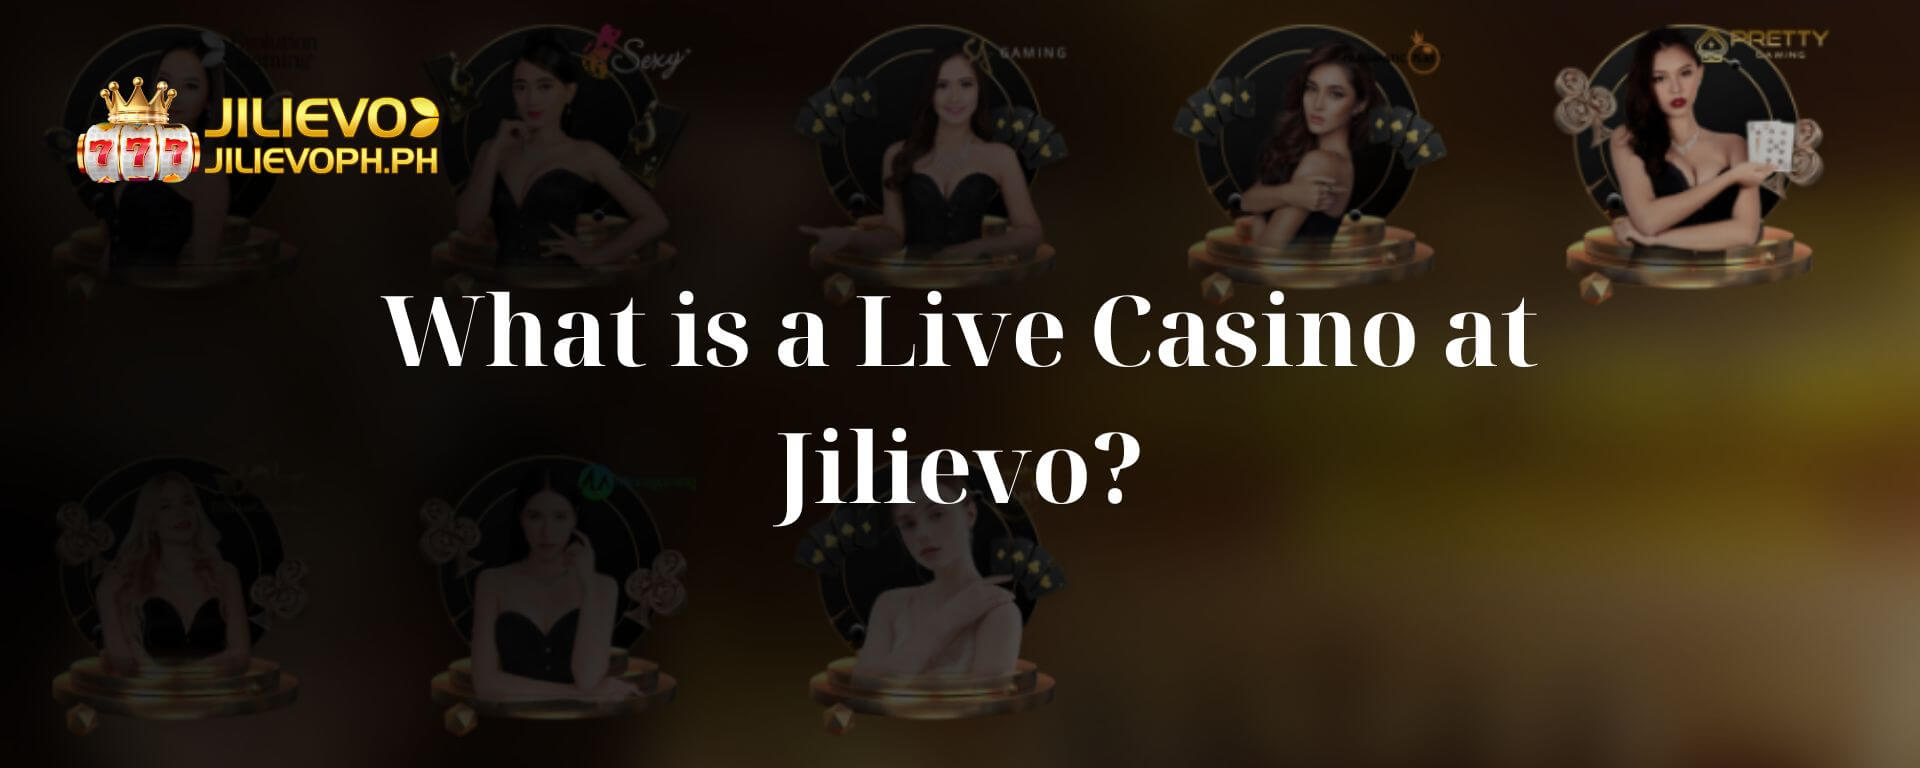 What is a Live Casino at Jilievo?